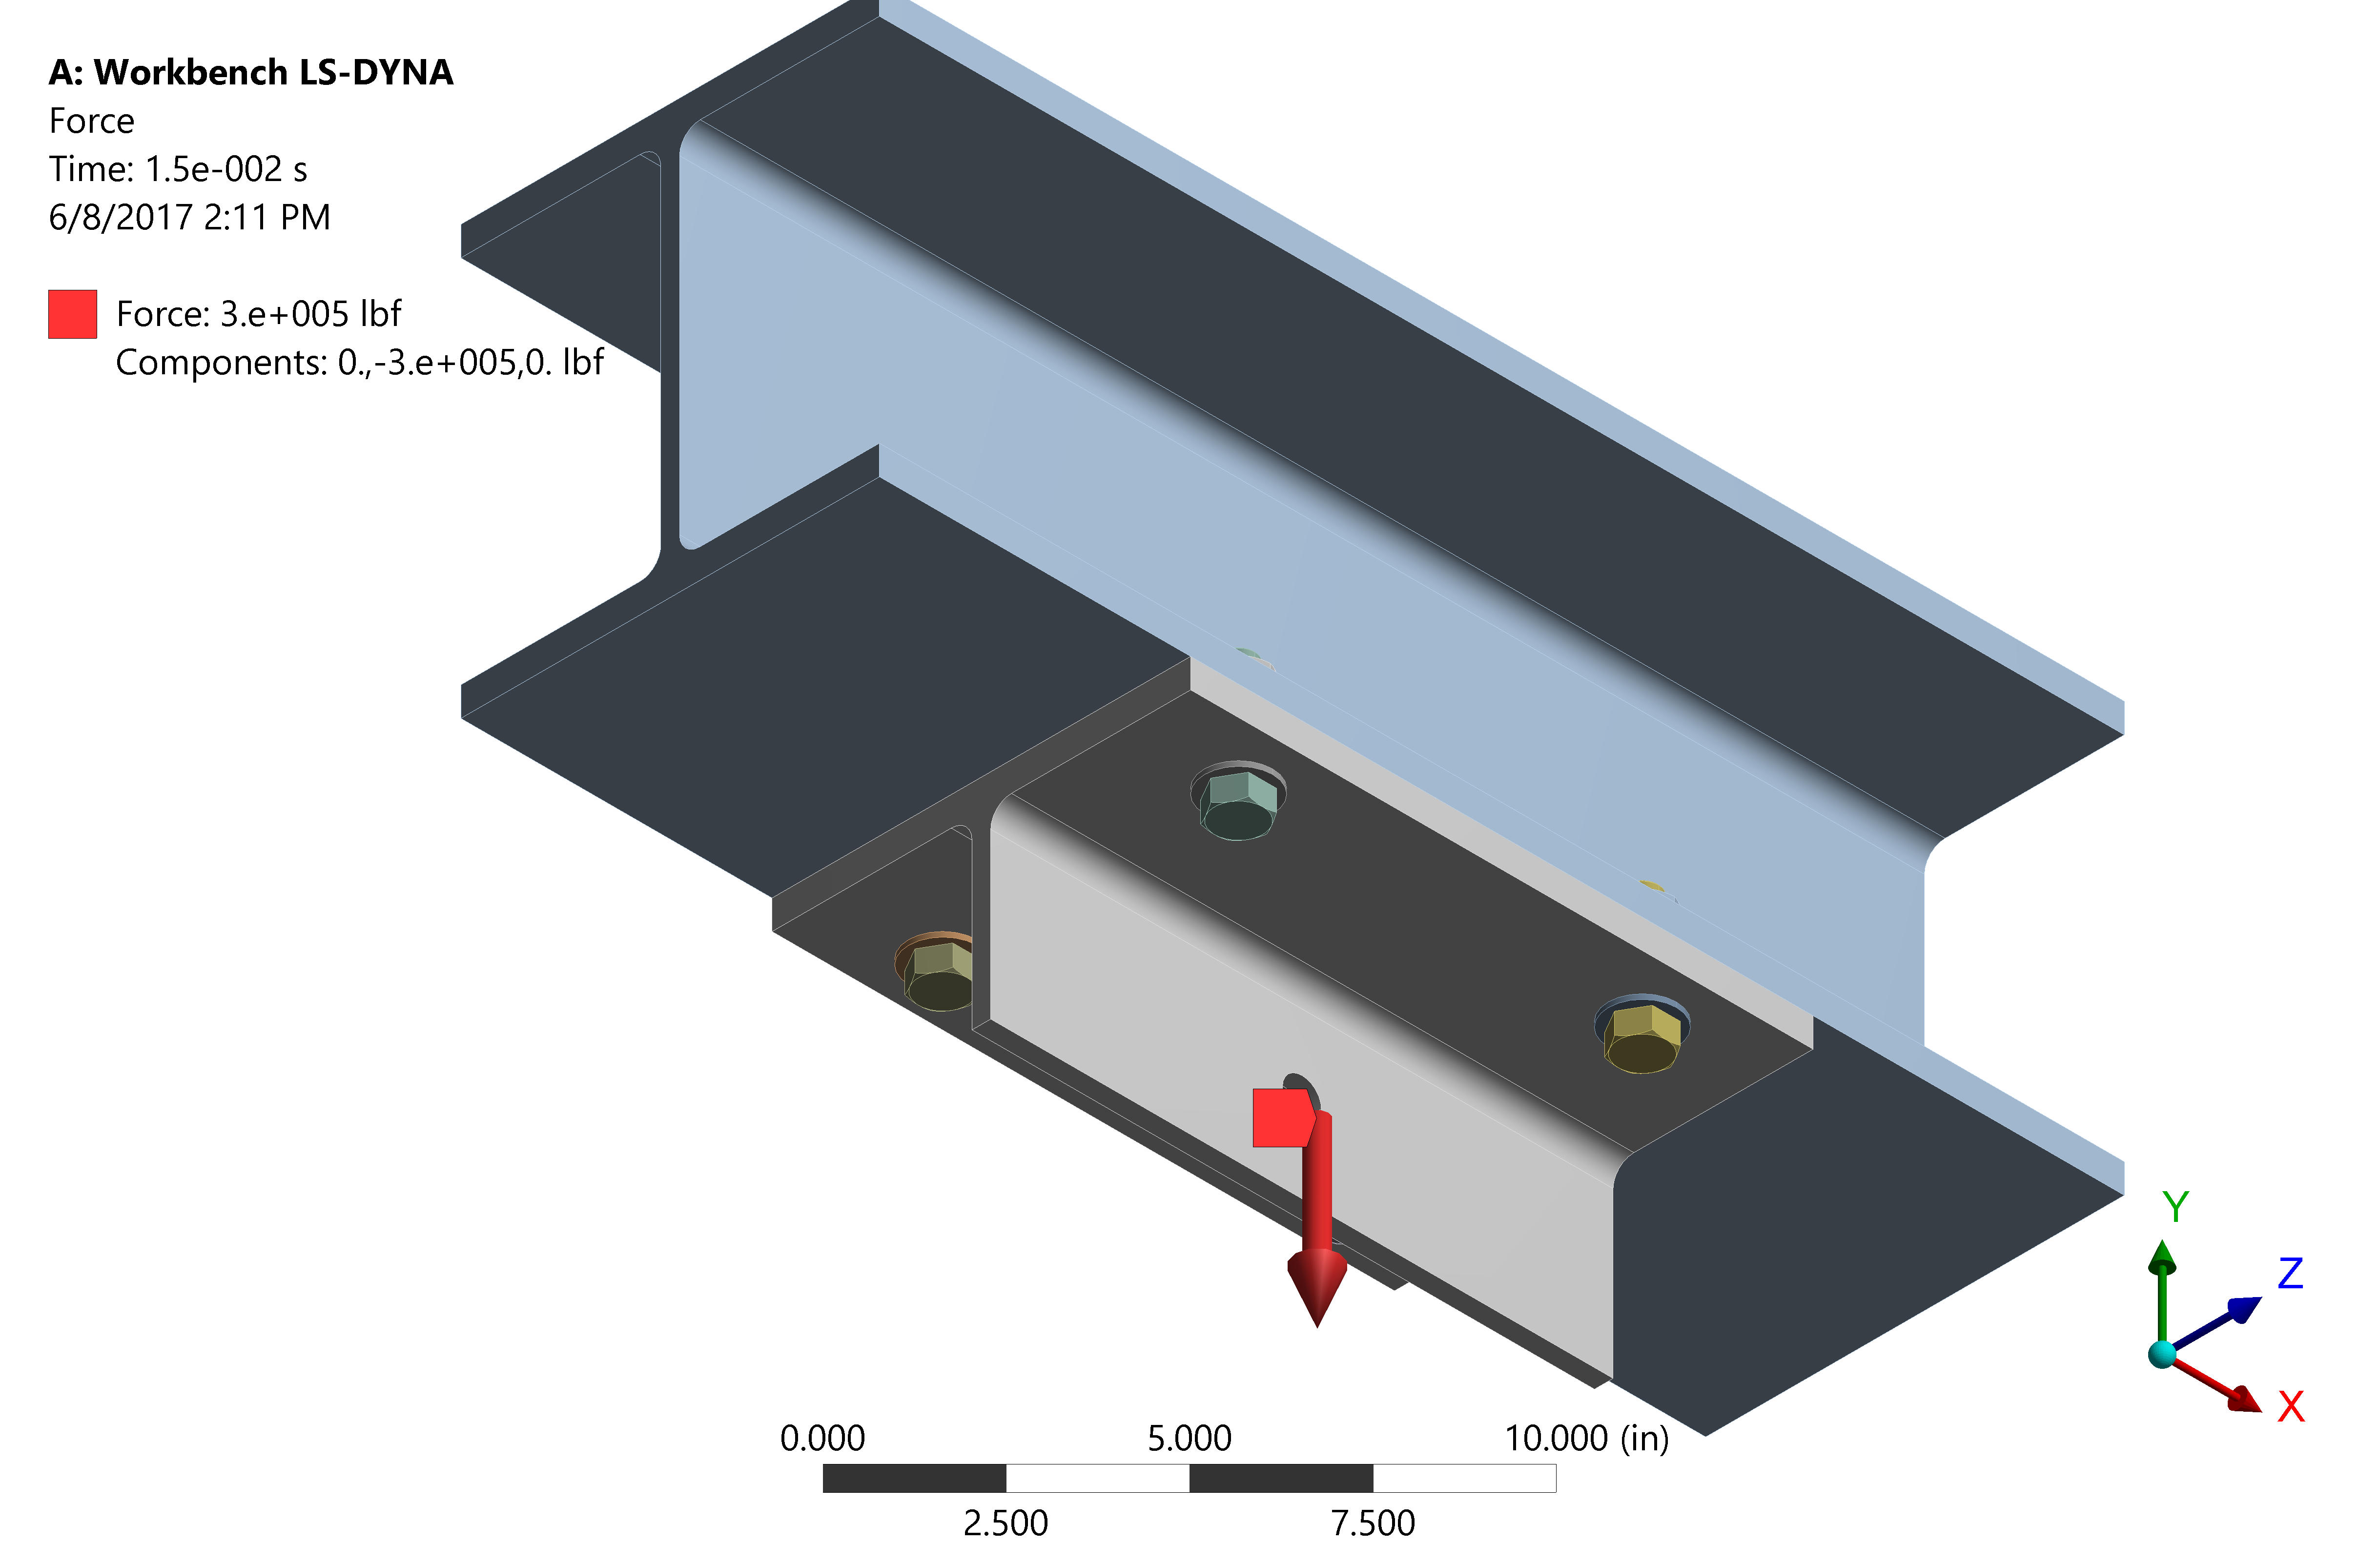 Modeling Bolted Connections Under External Load With Finite Element Analysis